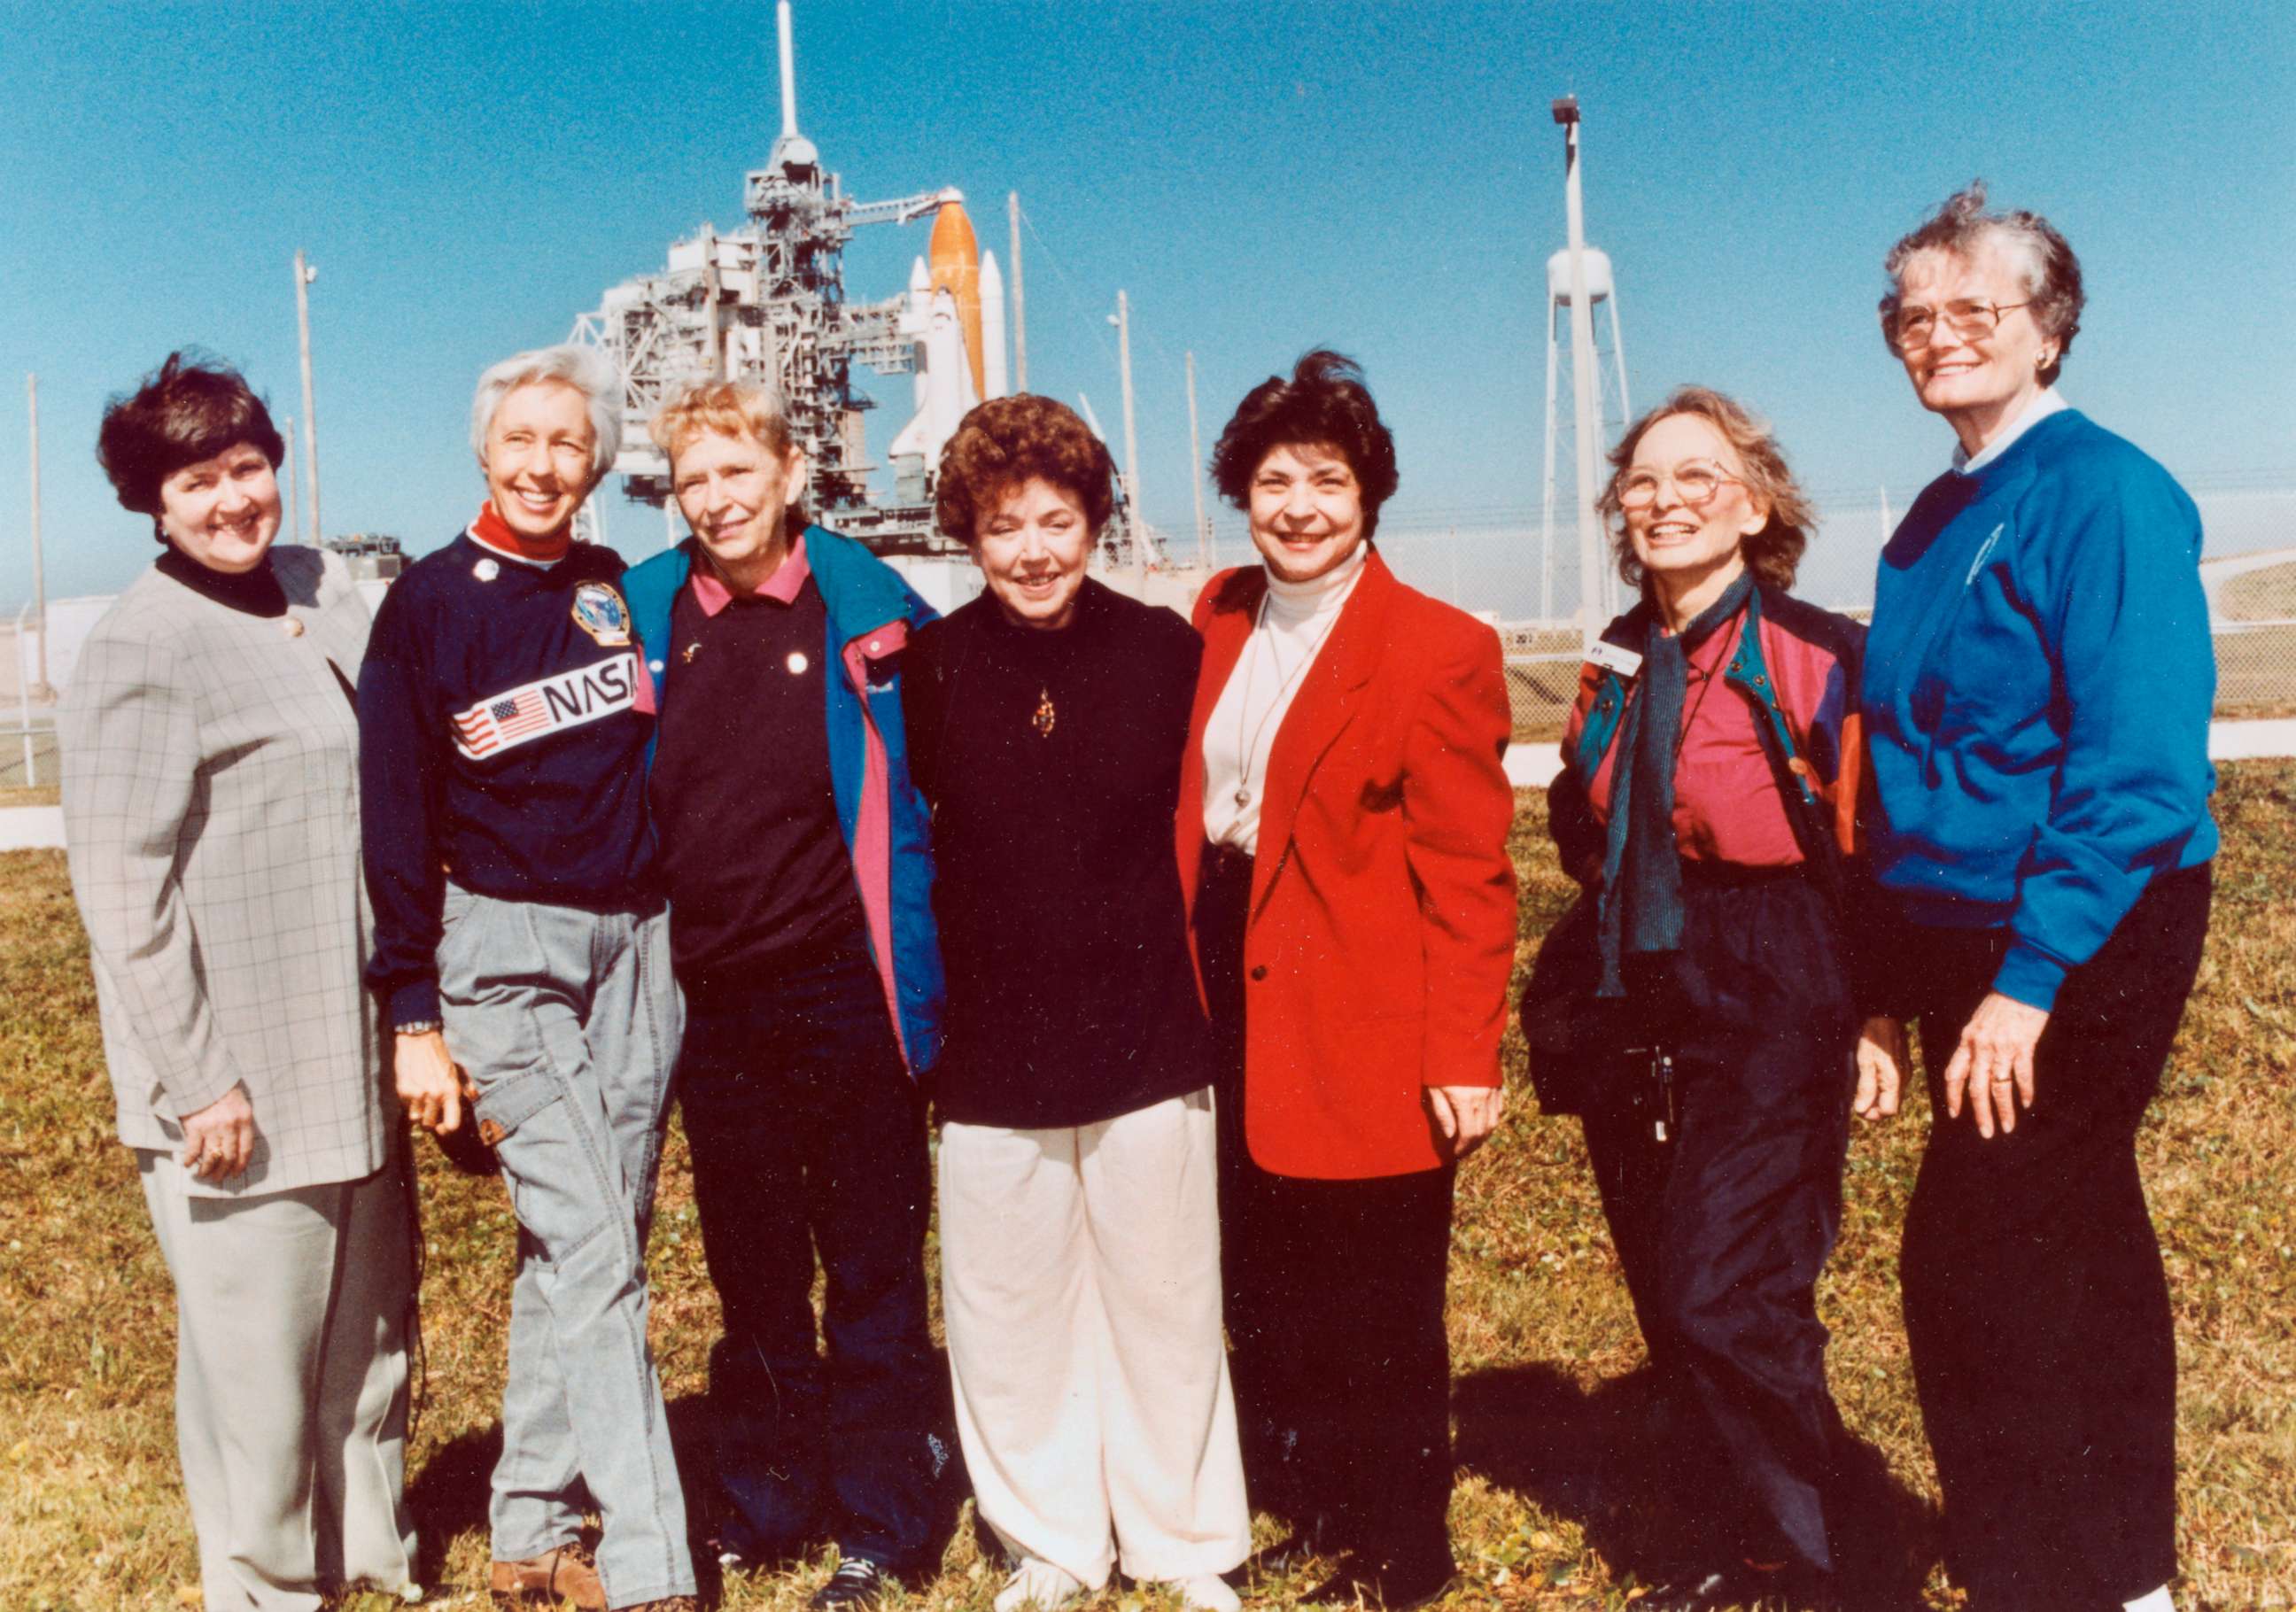 PHOTO: Members of the FLATs, also known as the Mercury 13, gather for a photo as they attend a shuttle launch in Florida in 1995. From left are Gene Nora Jessen, Wally Funk, Jerrie Cobb, Jerri Truhill, Sarah Rutley, Myrtle Cagle and Bernice Steadman.